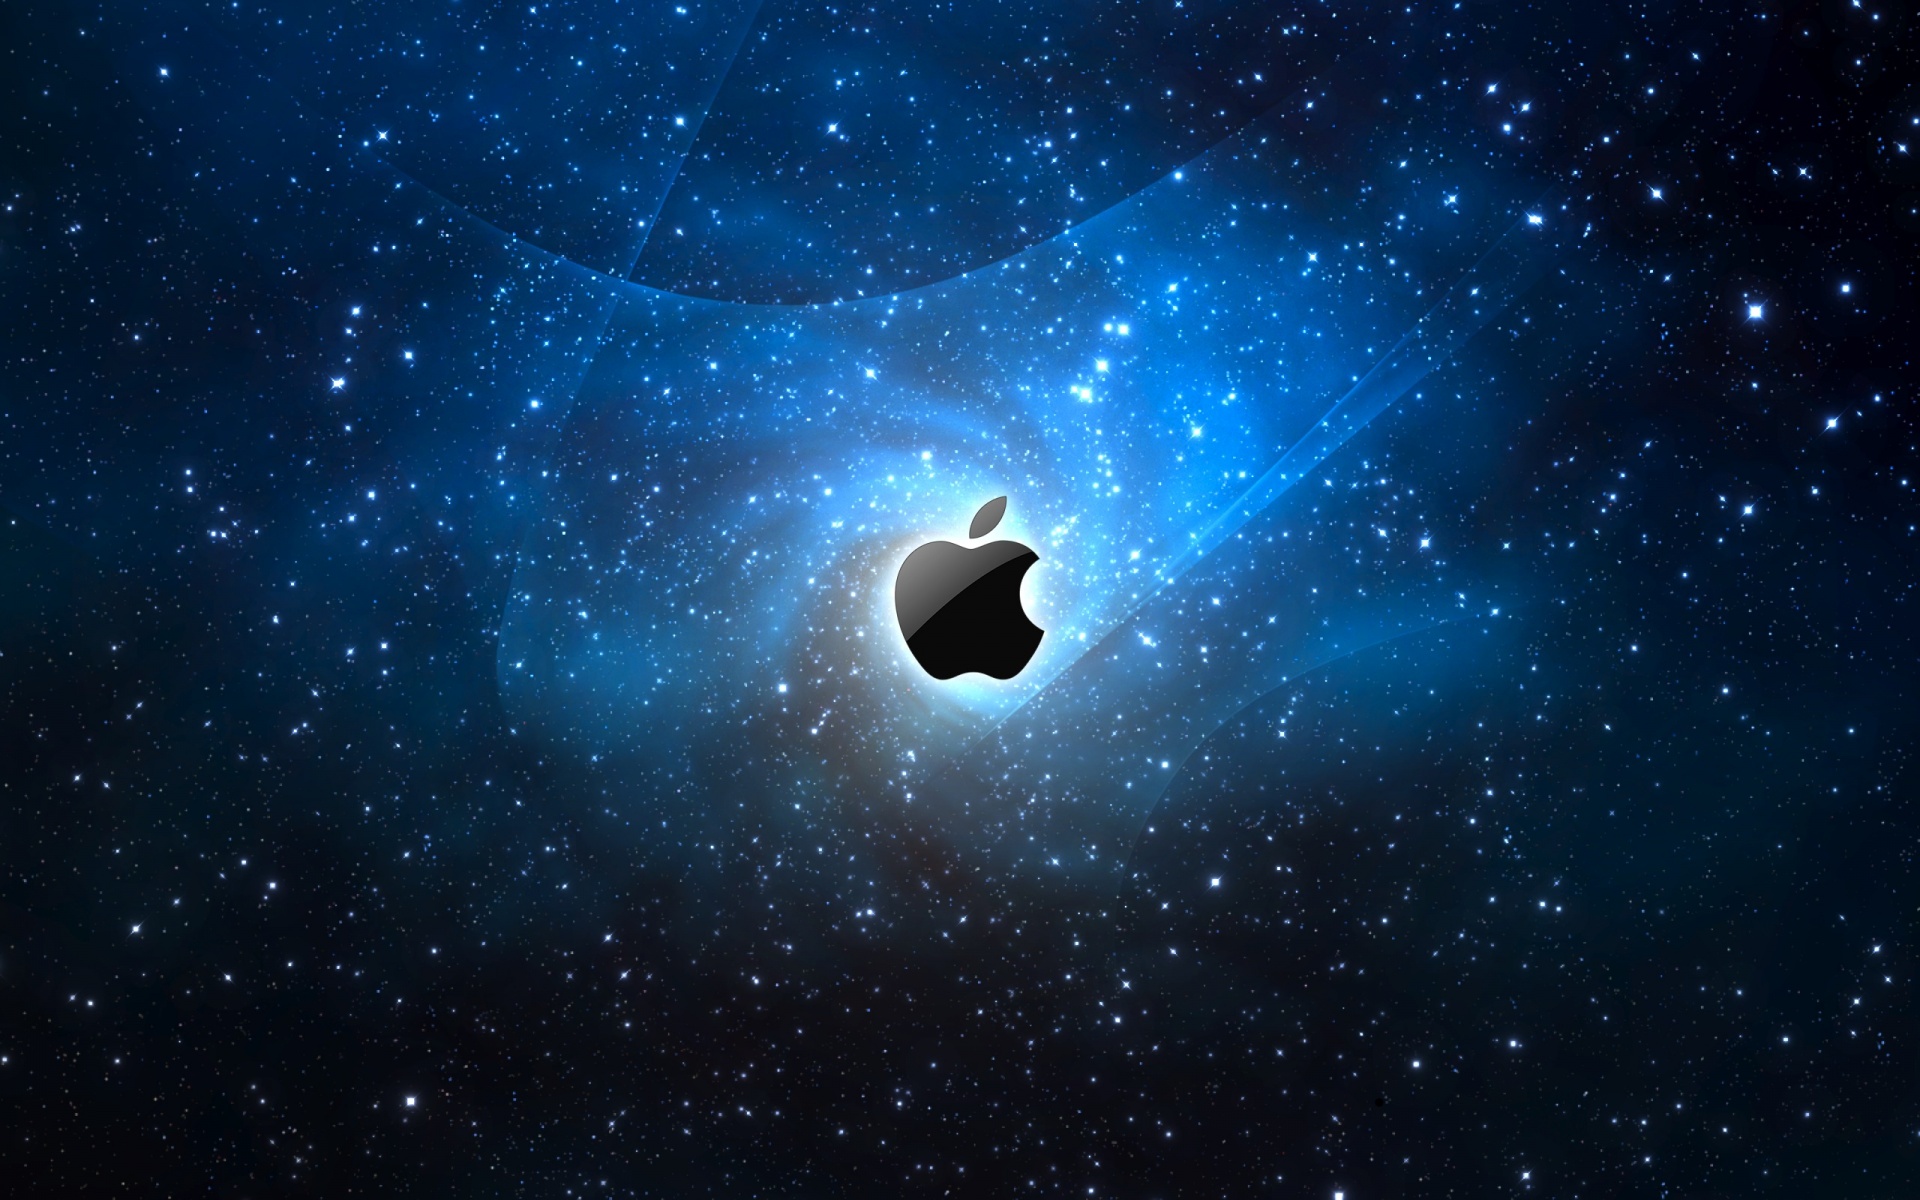 Geek insider, geekinsider, geekinsider. Com,, 7 reasons apple is on its way out, iphone and ipad